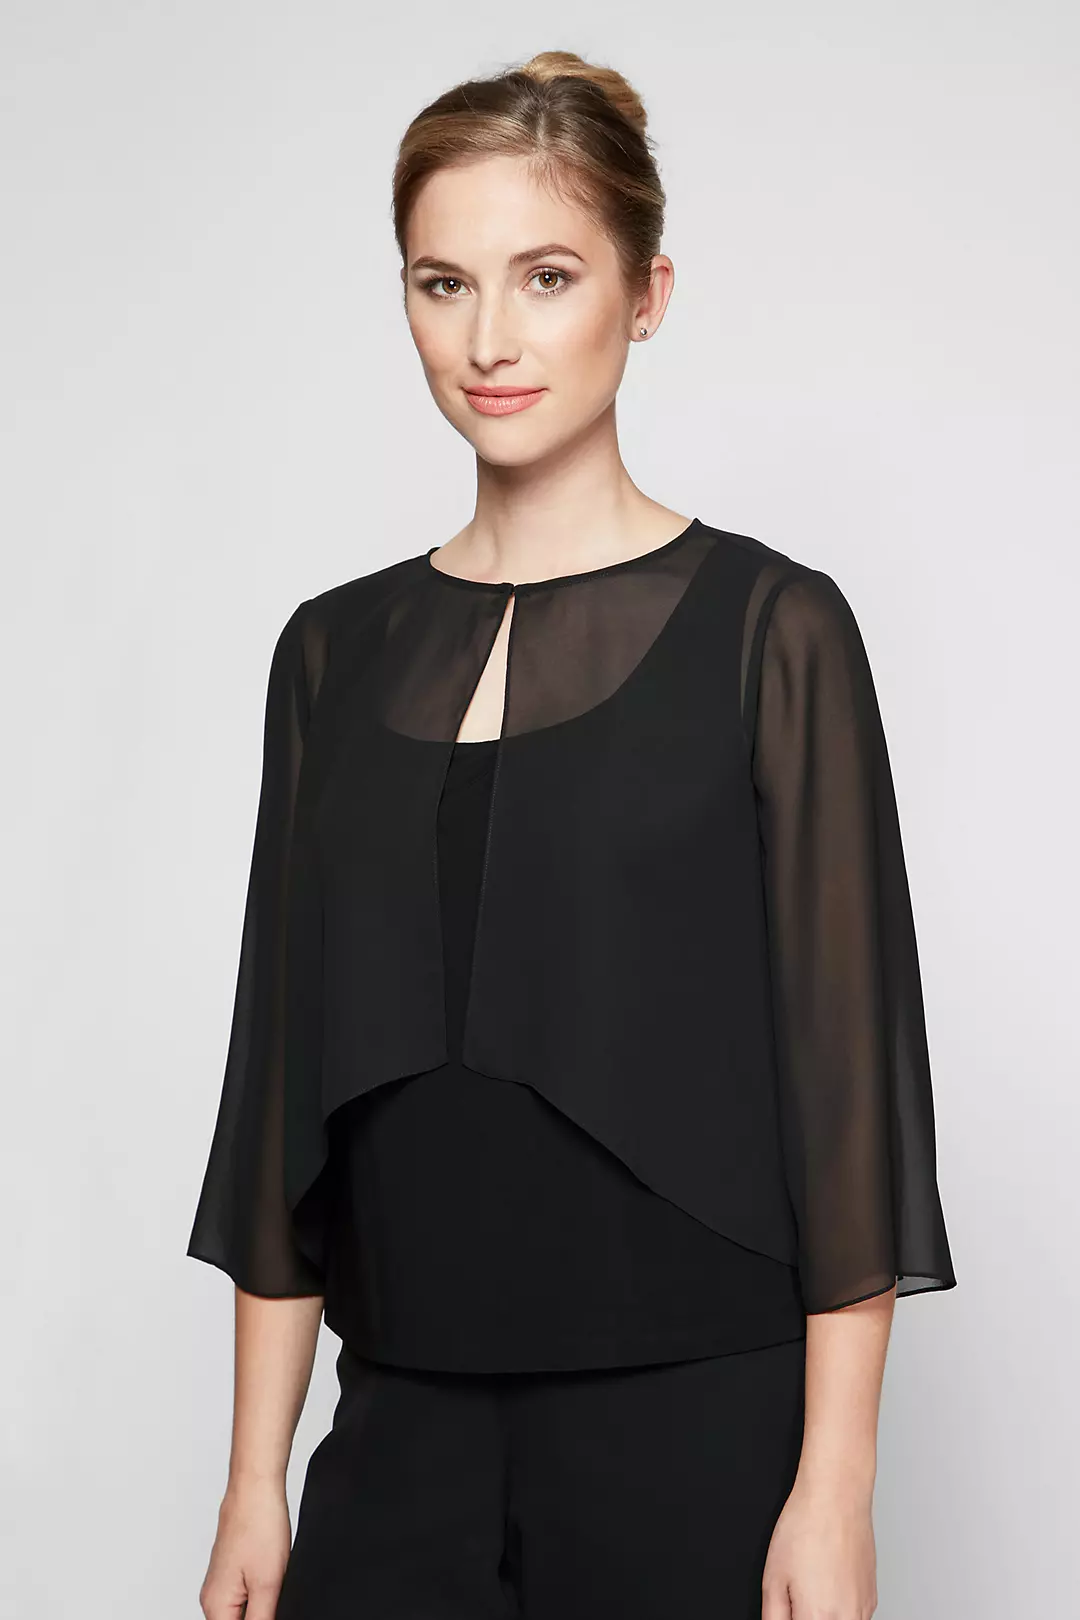 High-Low Chiffon Cover Up with Split Sleeves Image